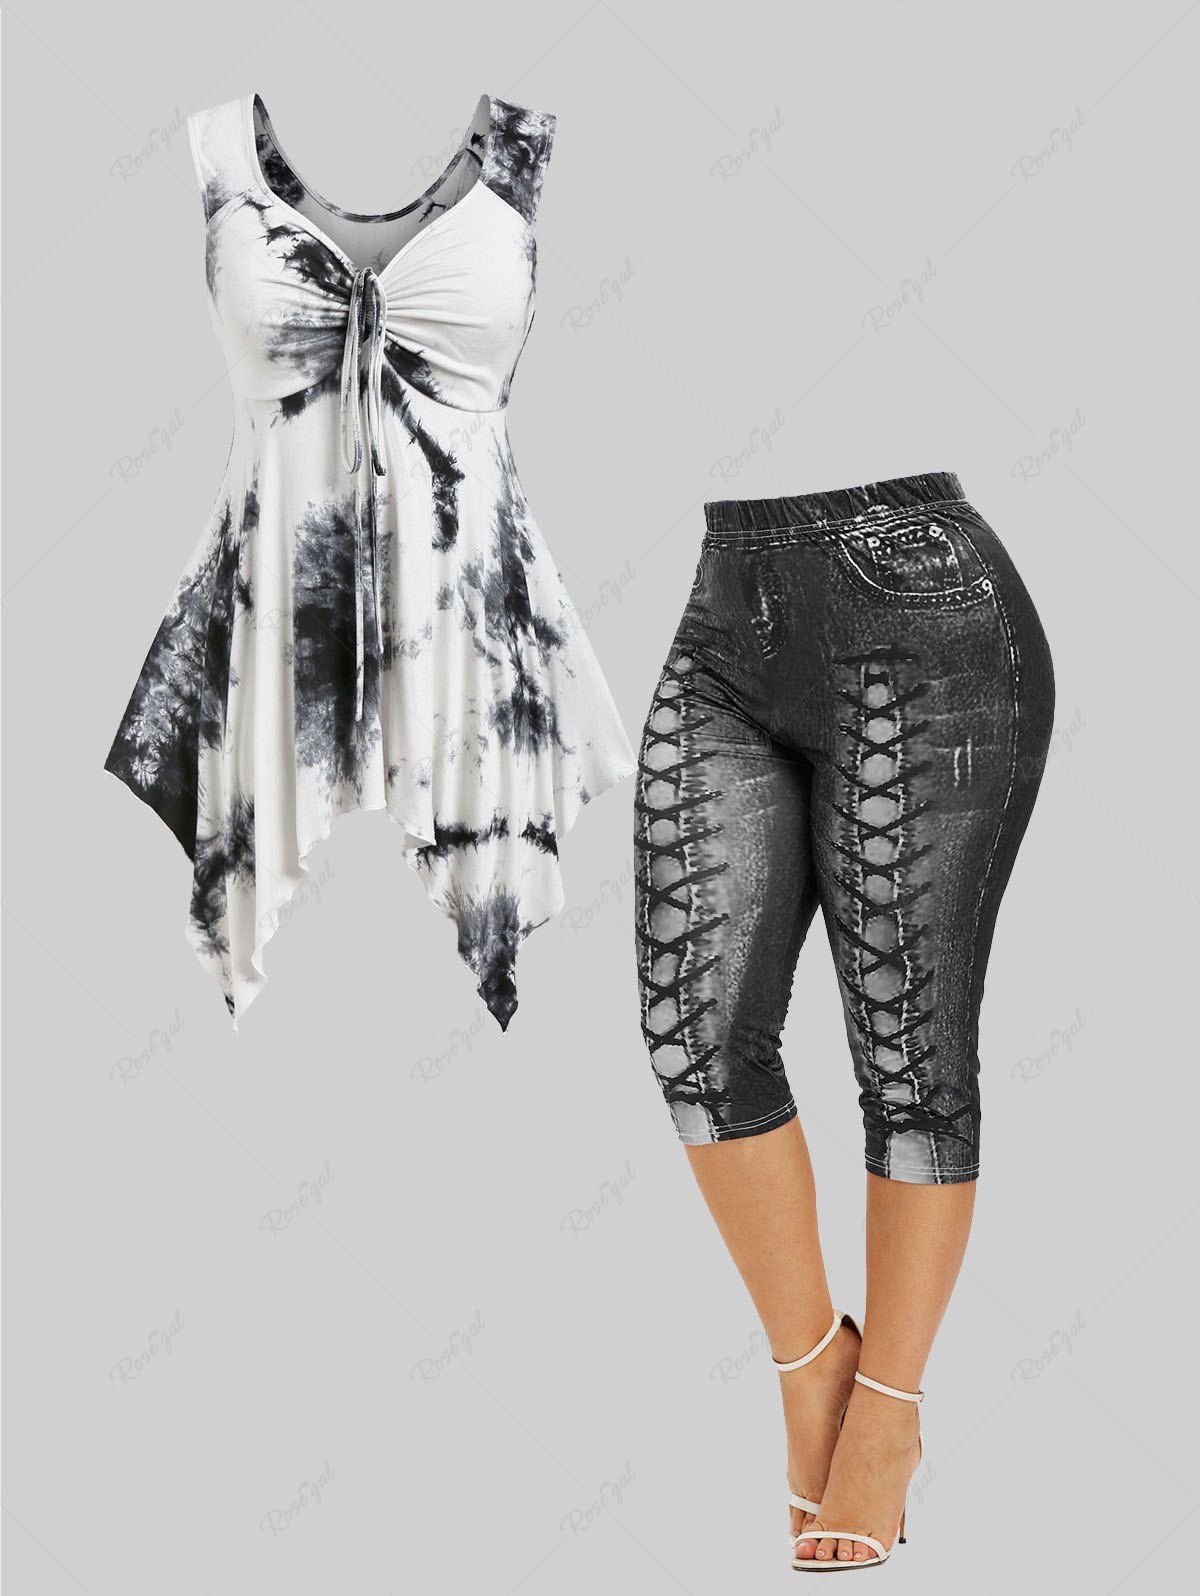 Buy Handkerchief Tie Dye Tank Top and 3D Print Cropped Leggings Plus Size Summer Outfit  